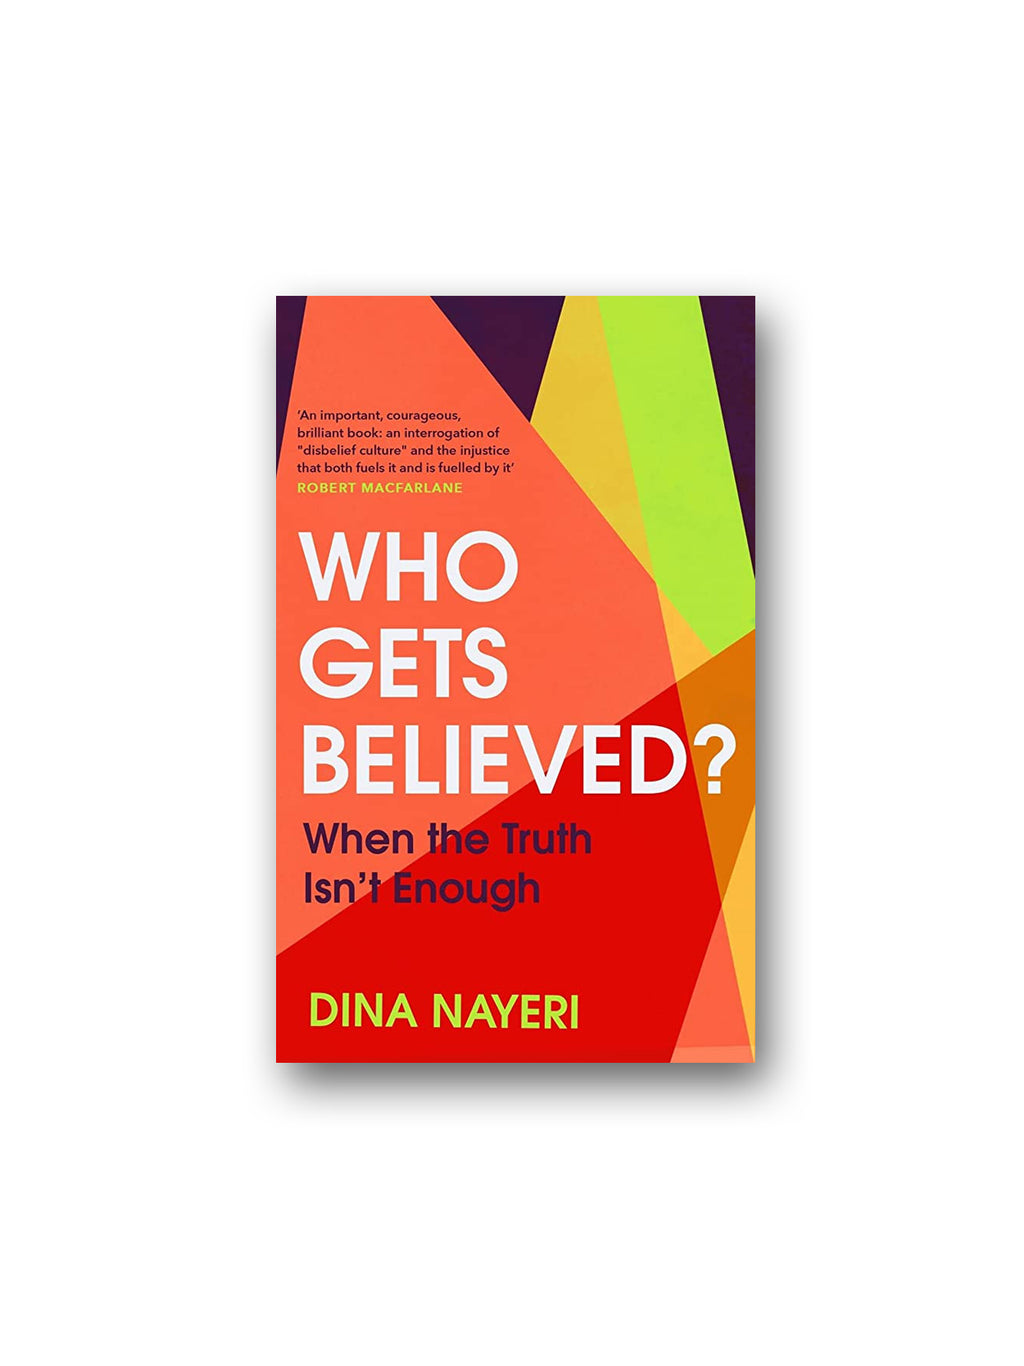 Who Gets Believed? : When the Truth Isn't Enough